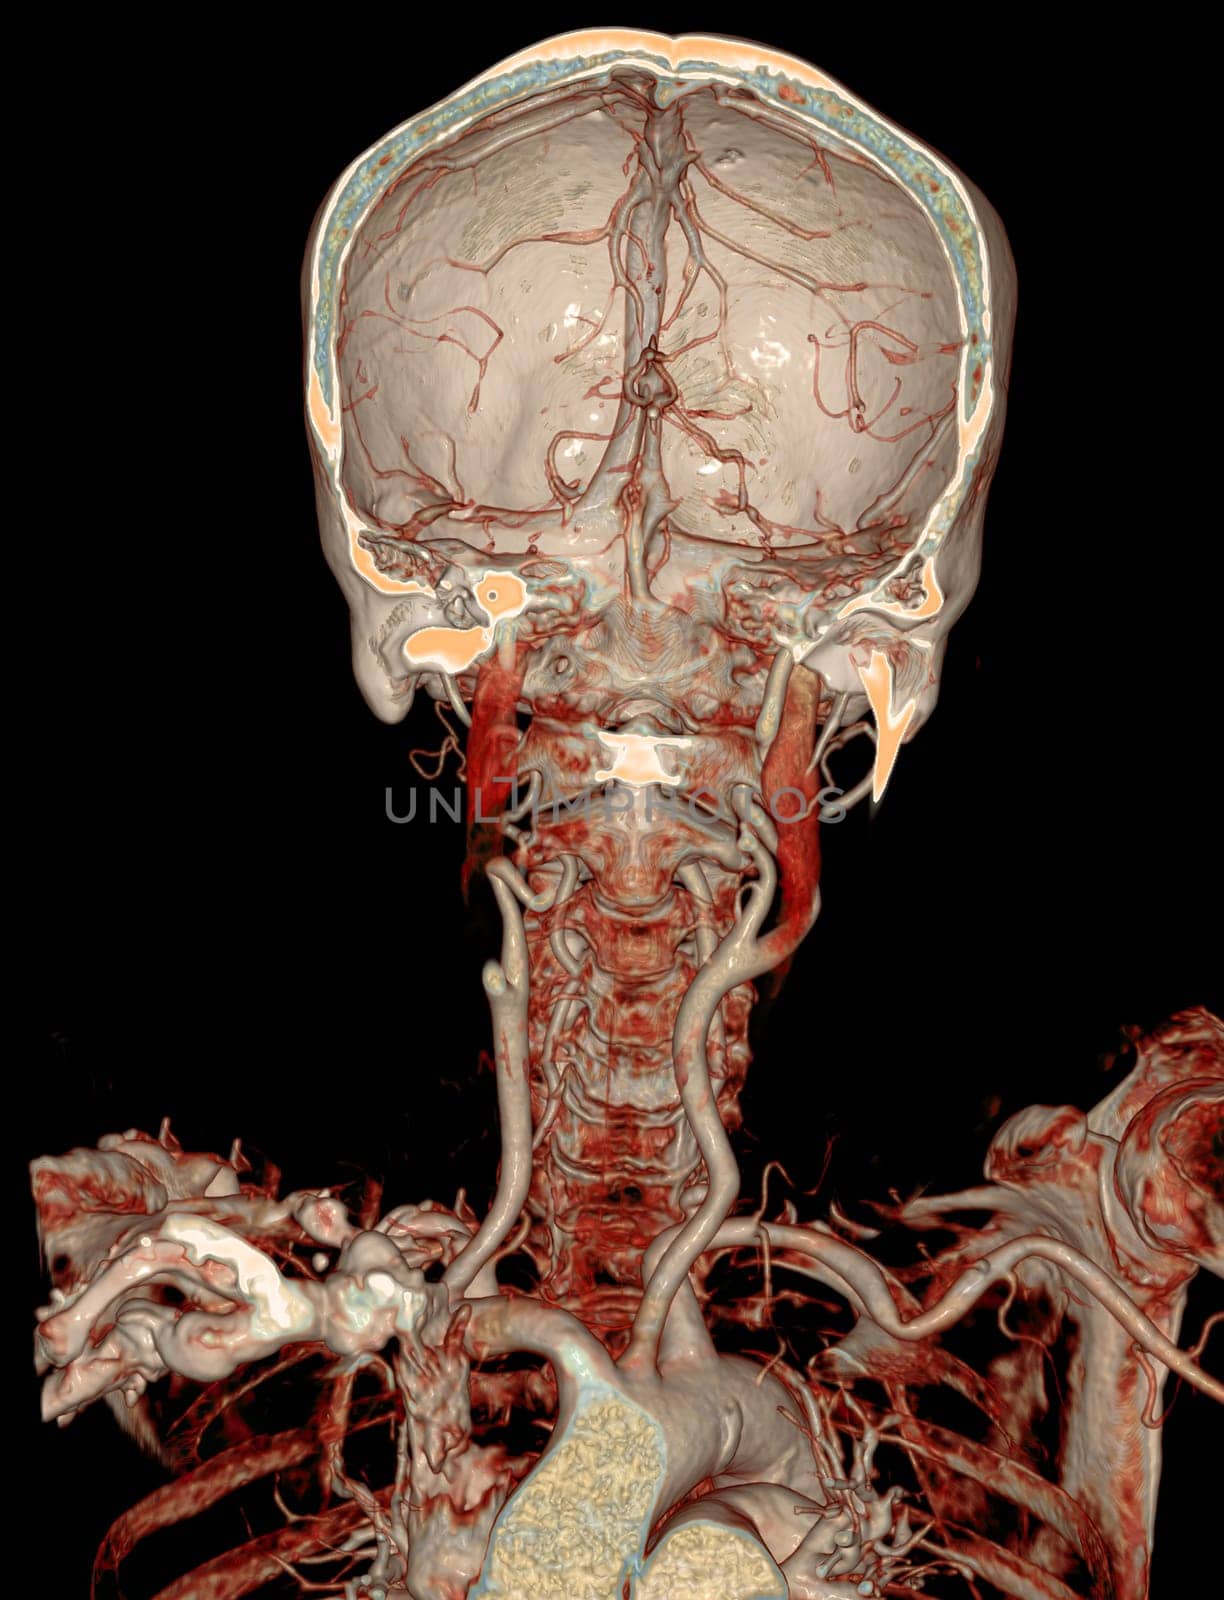  CTA brain and carotid artery or CT angiography of the brain  3D Rendering image . by samunella